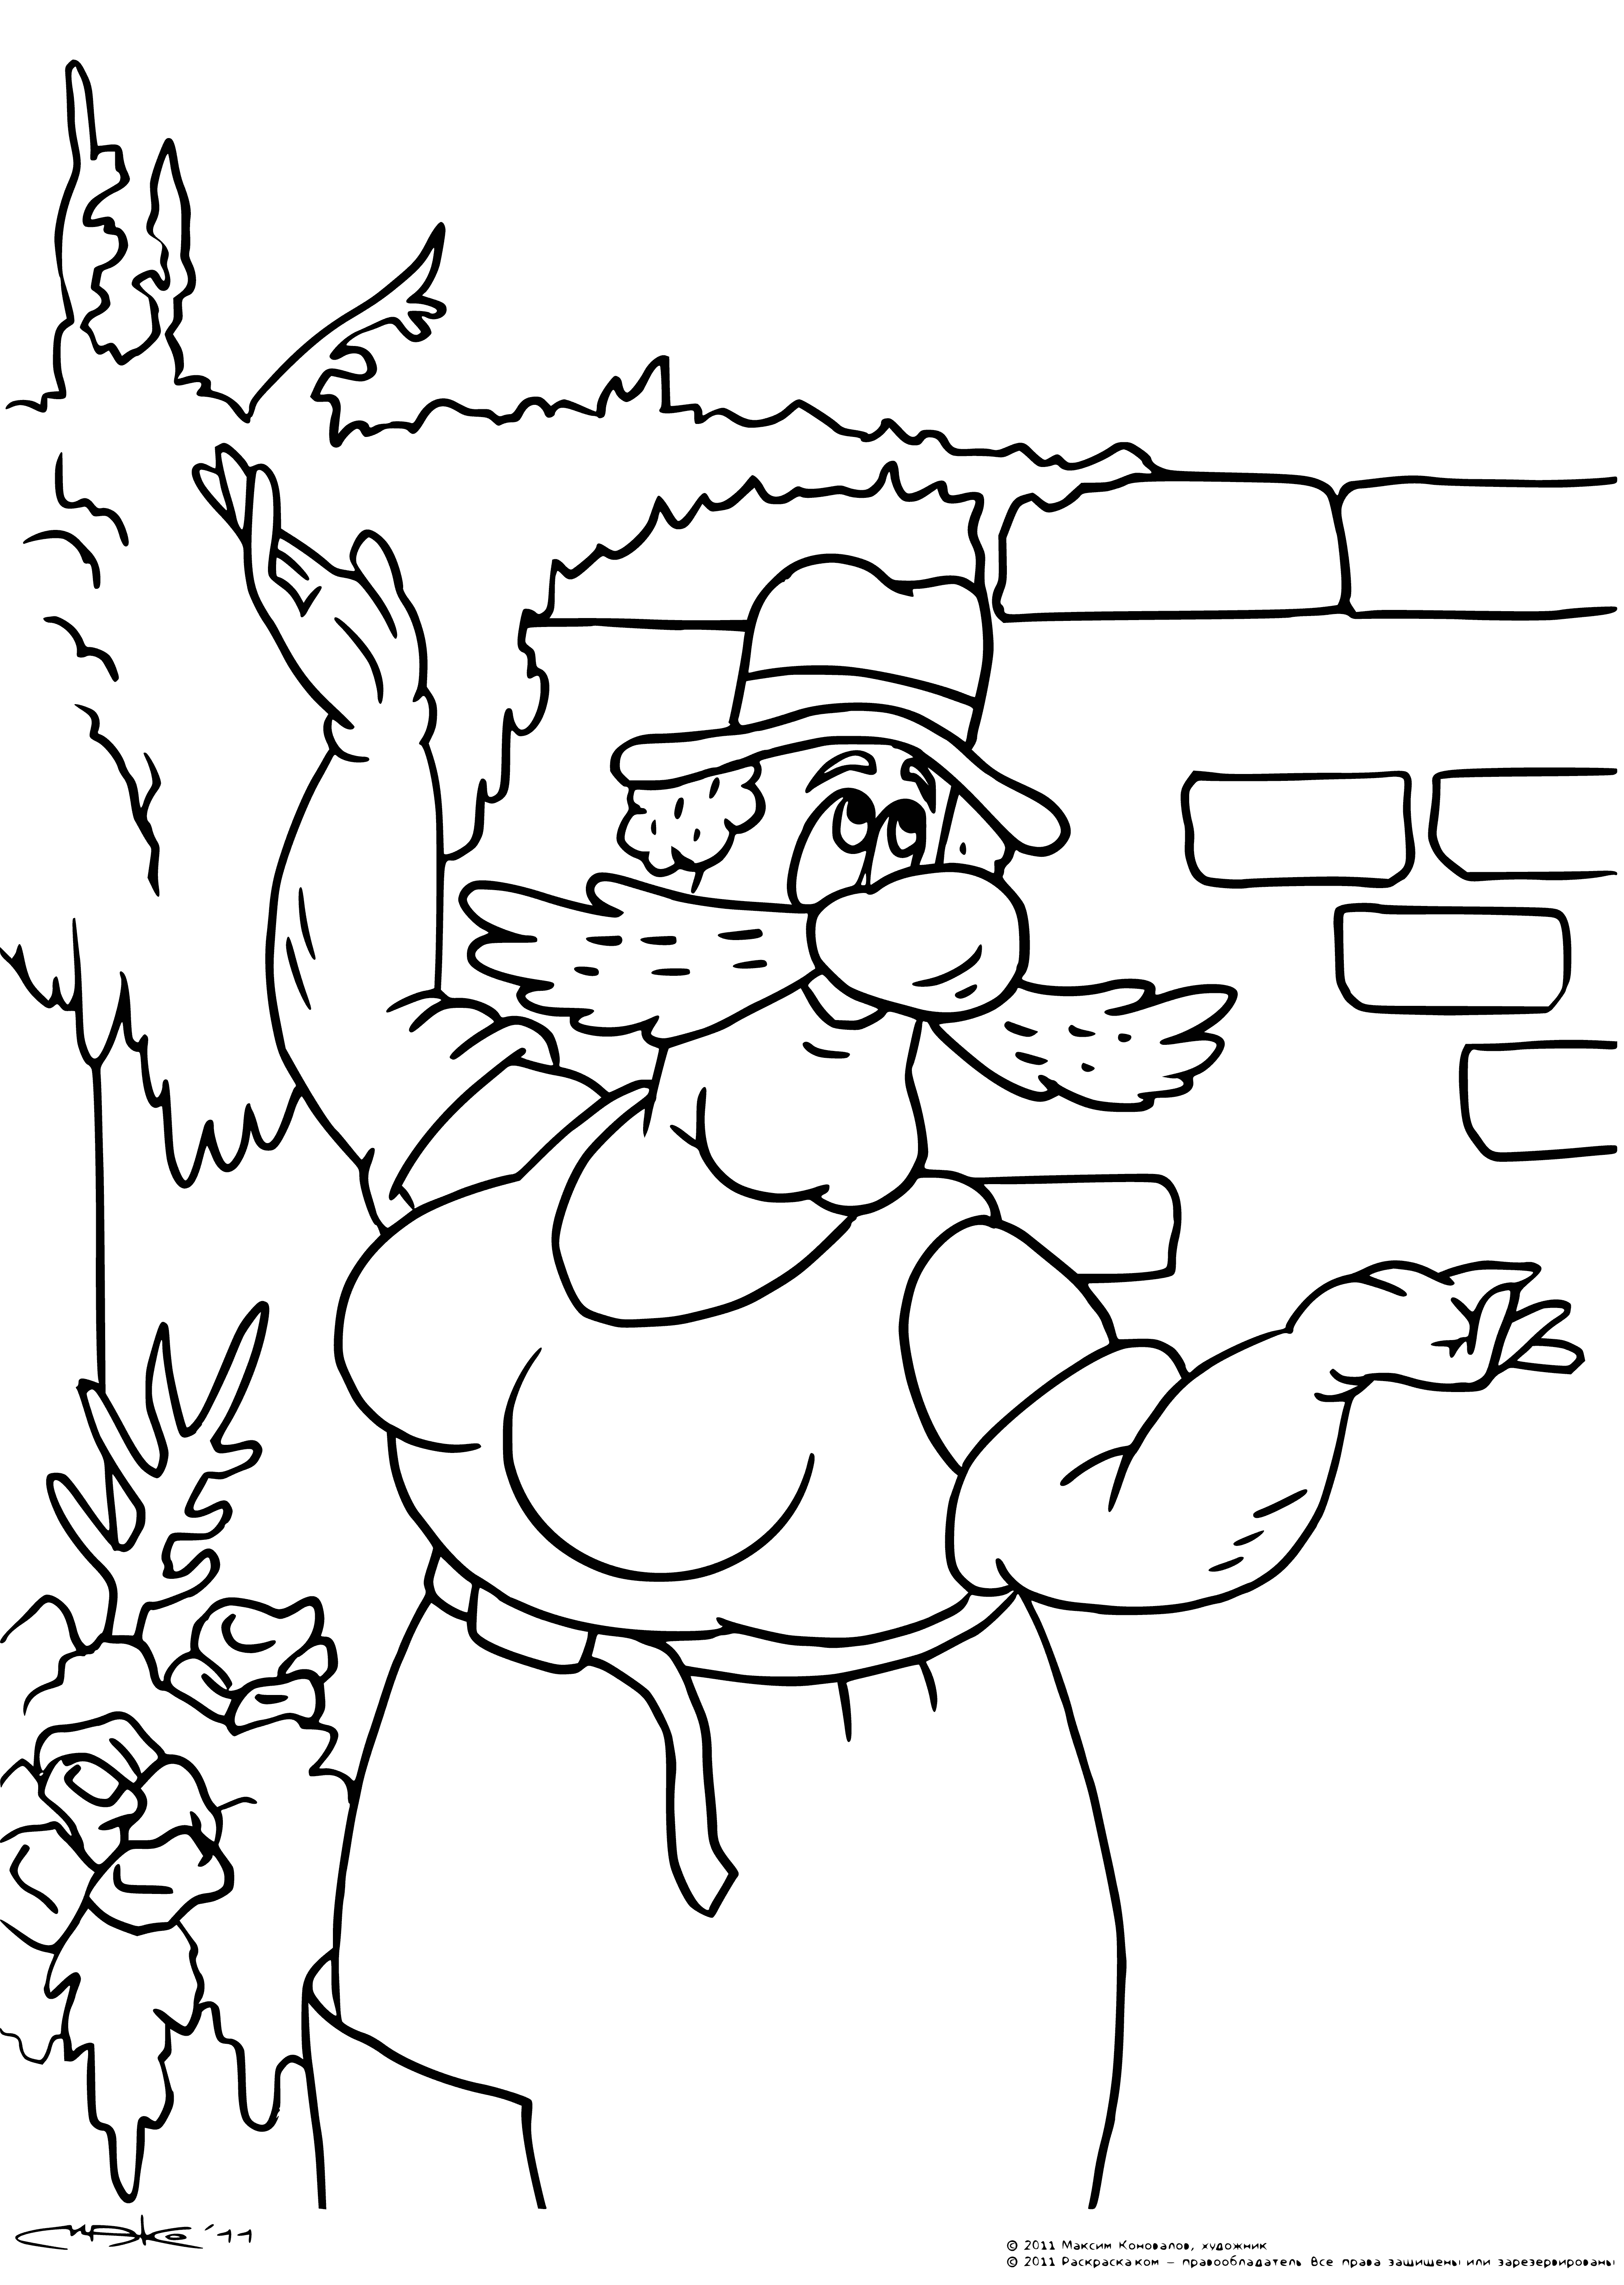 coloring page: Funtik and her grandpa meet an old lady who is missing her husband. Grandpa tries to comfort her when she starts to cry.